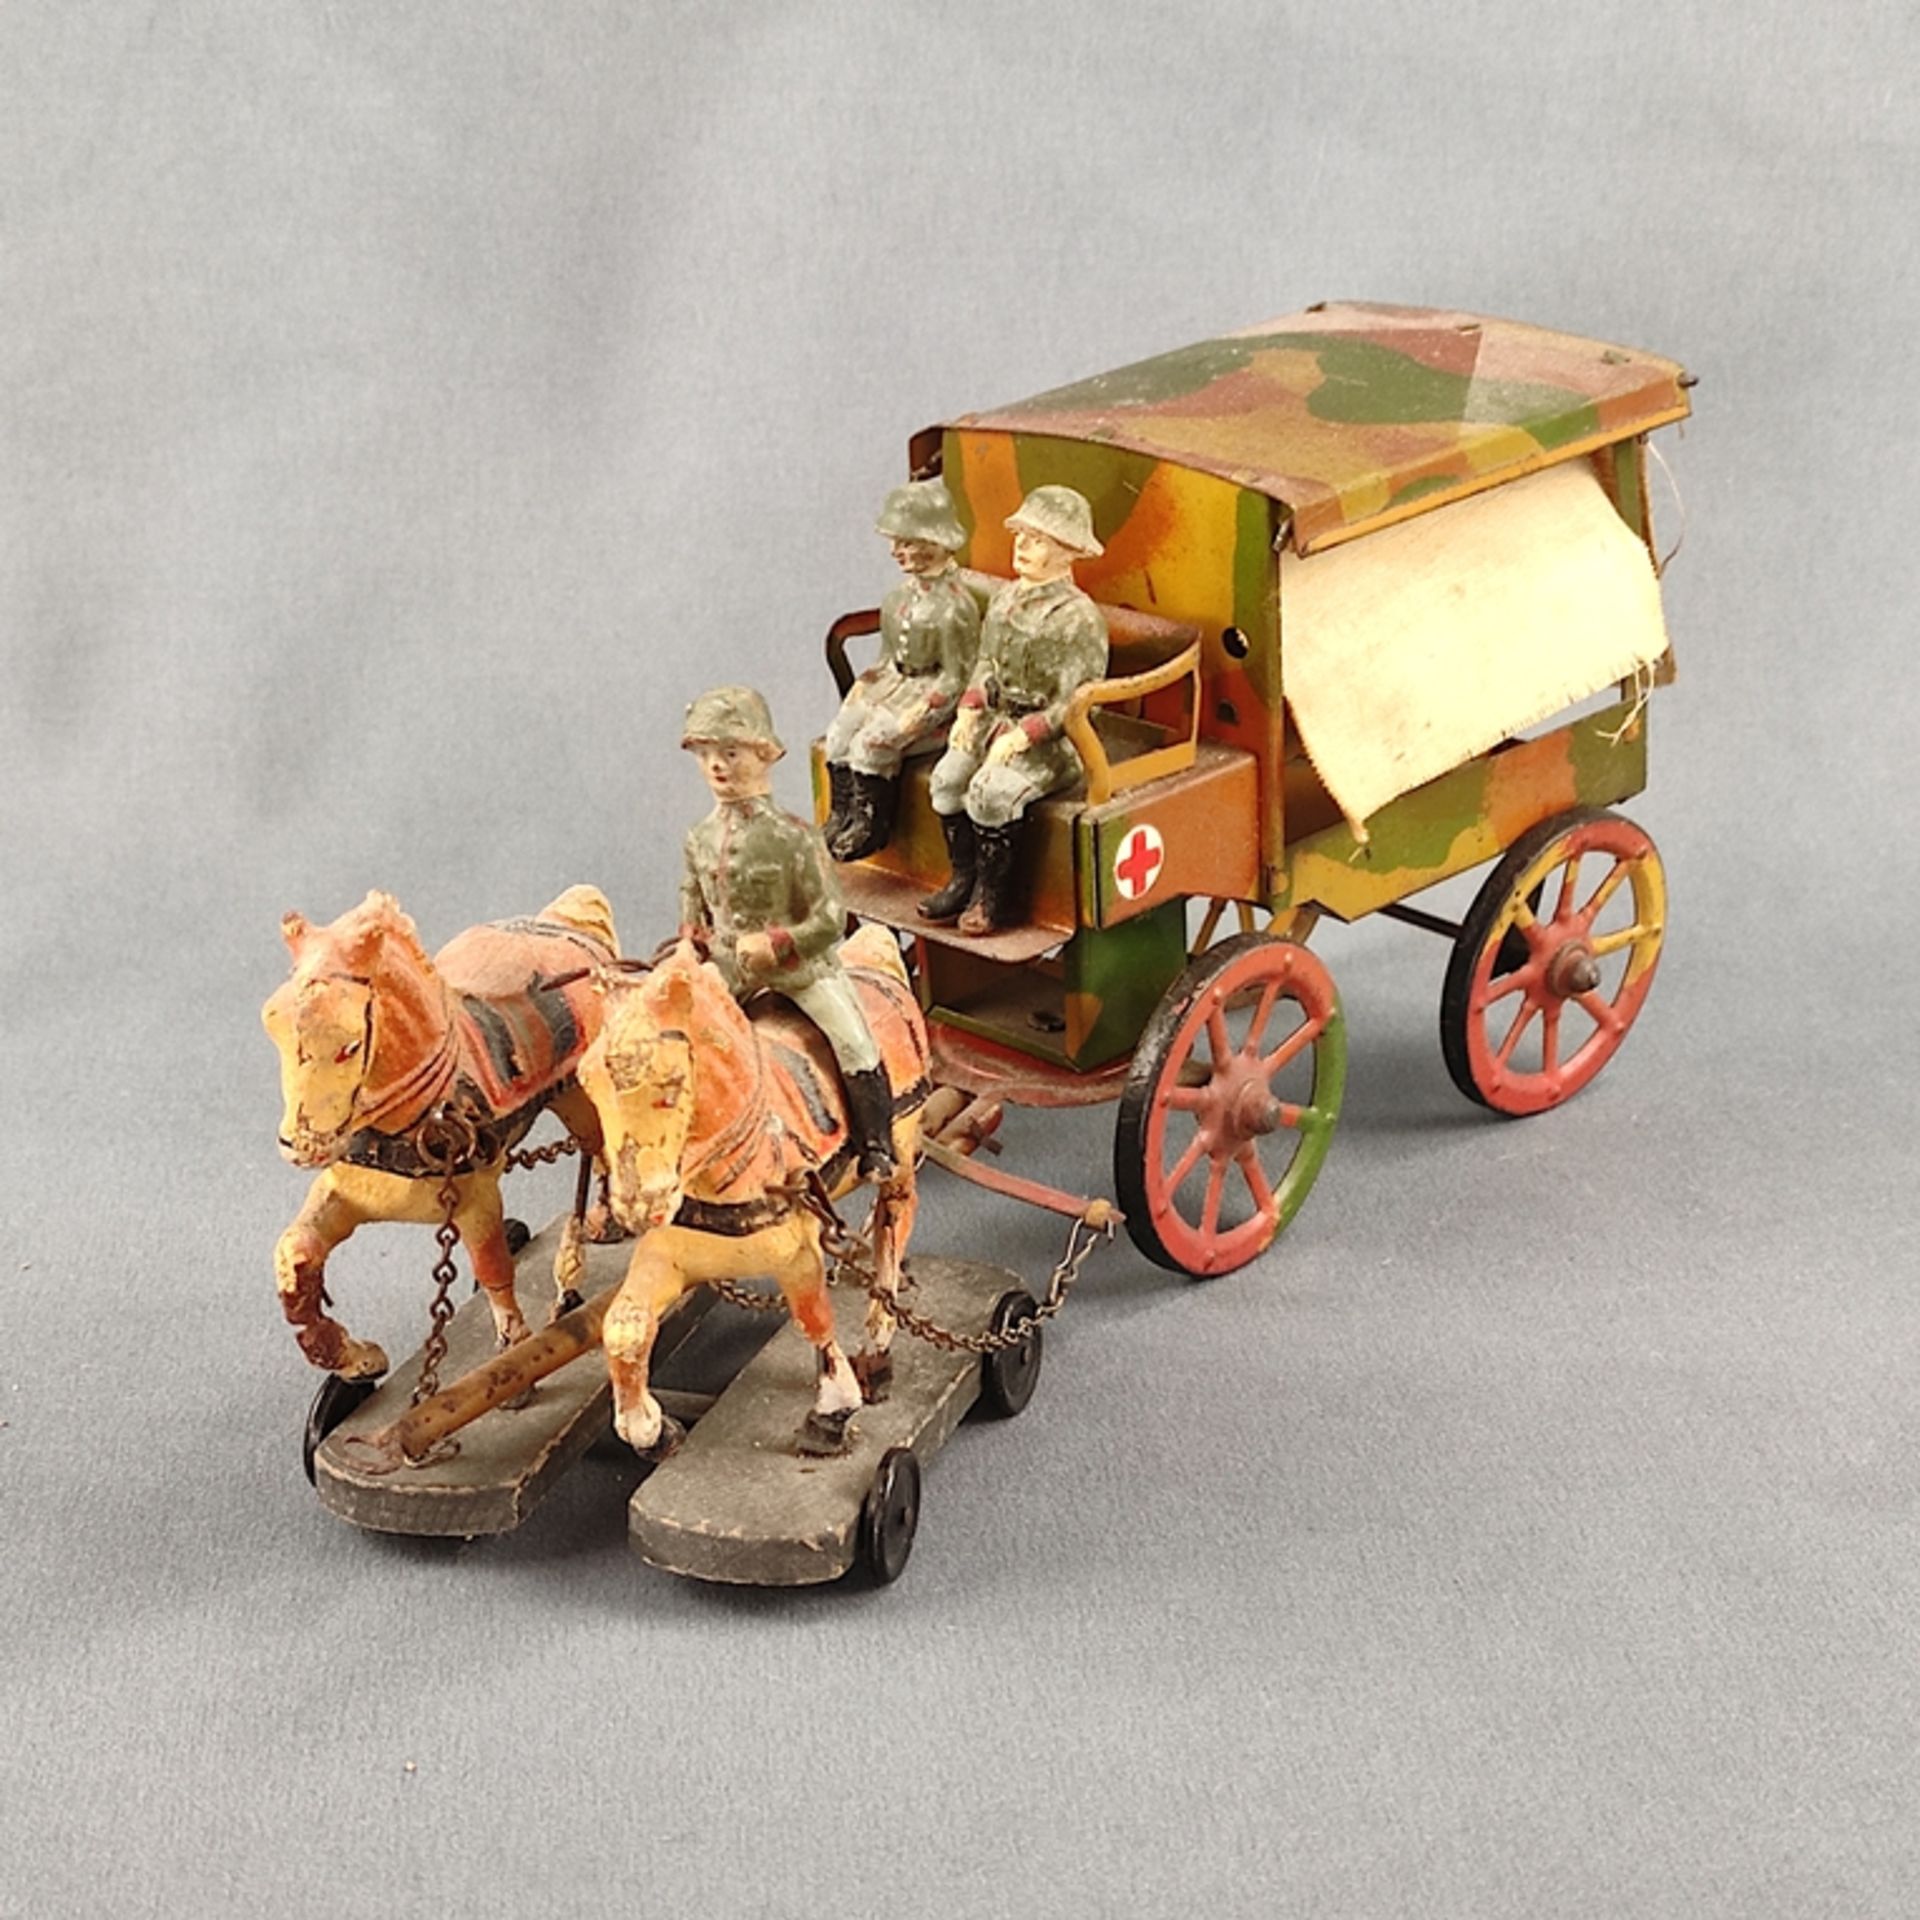 Elastolin ambulance, 2-horse with a rider and 2 ride-on horses, tin version, Germany, pre-war perio - Image 2 of 5